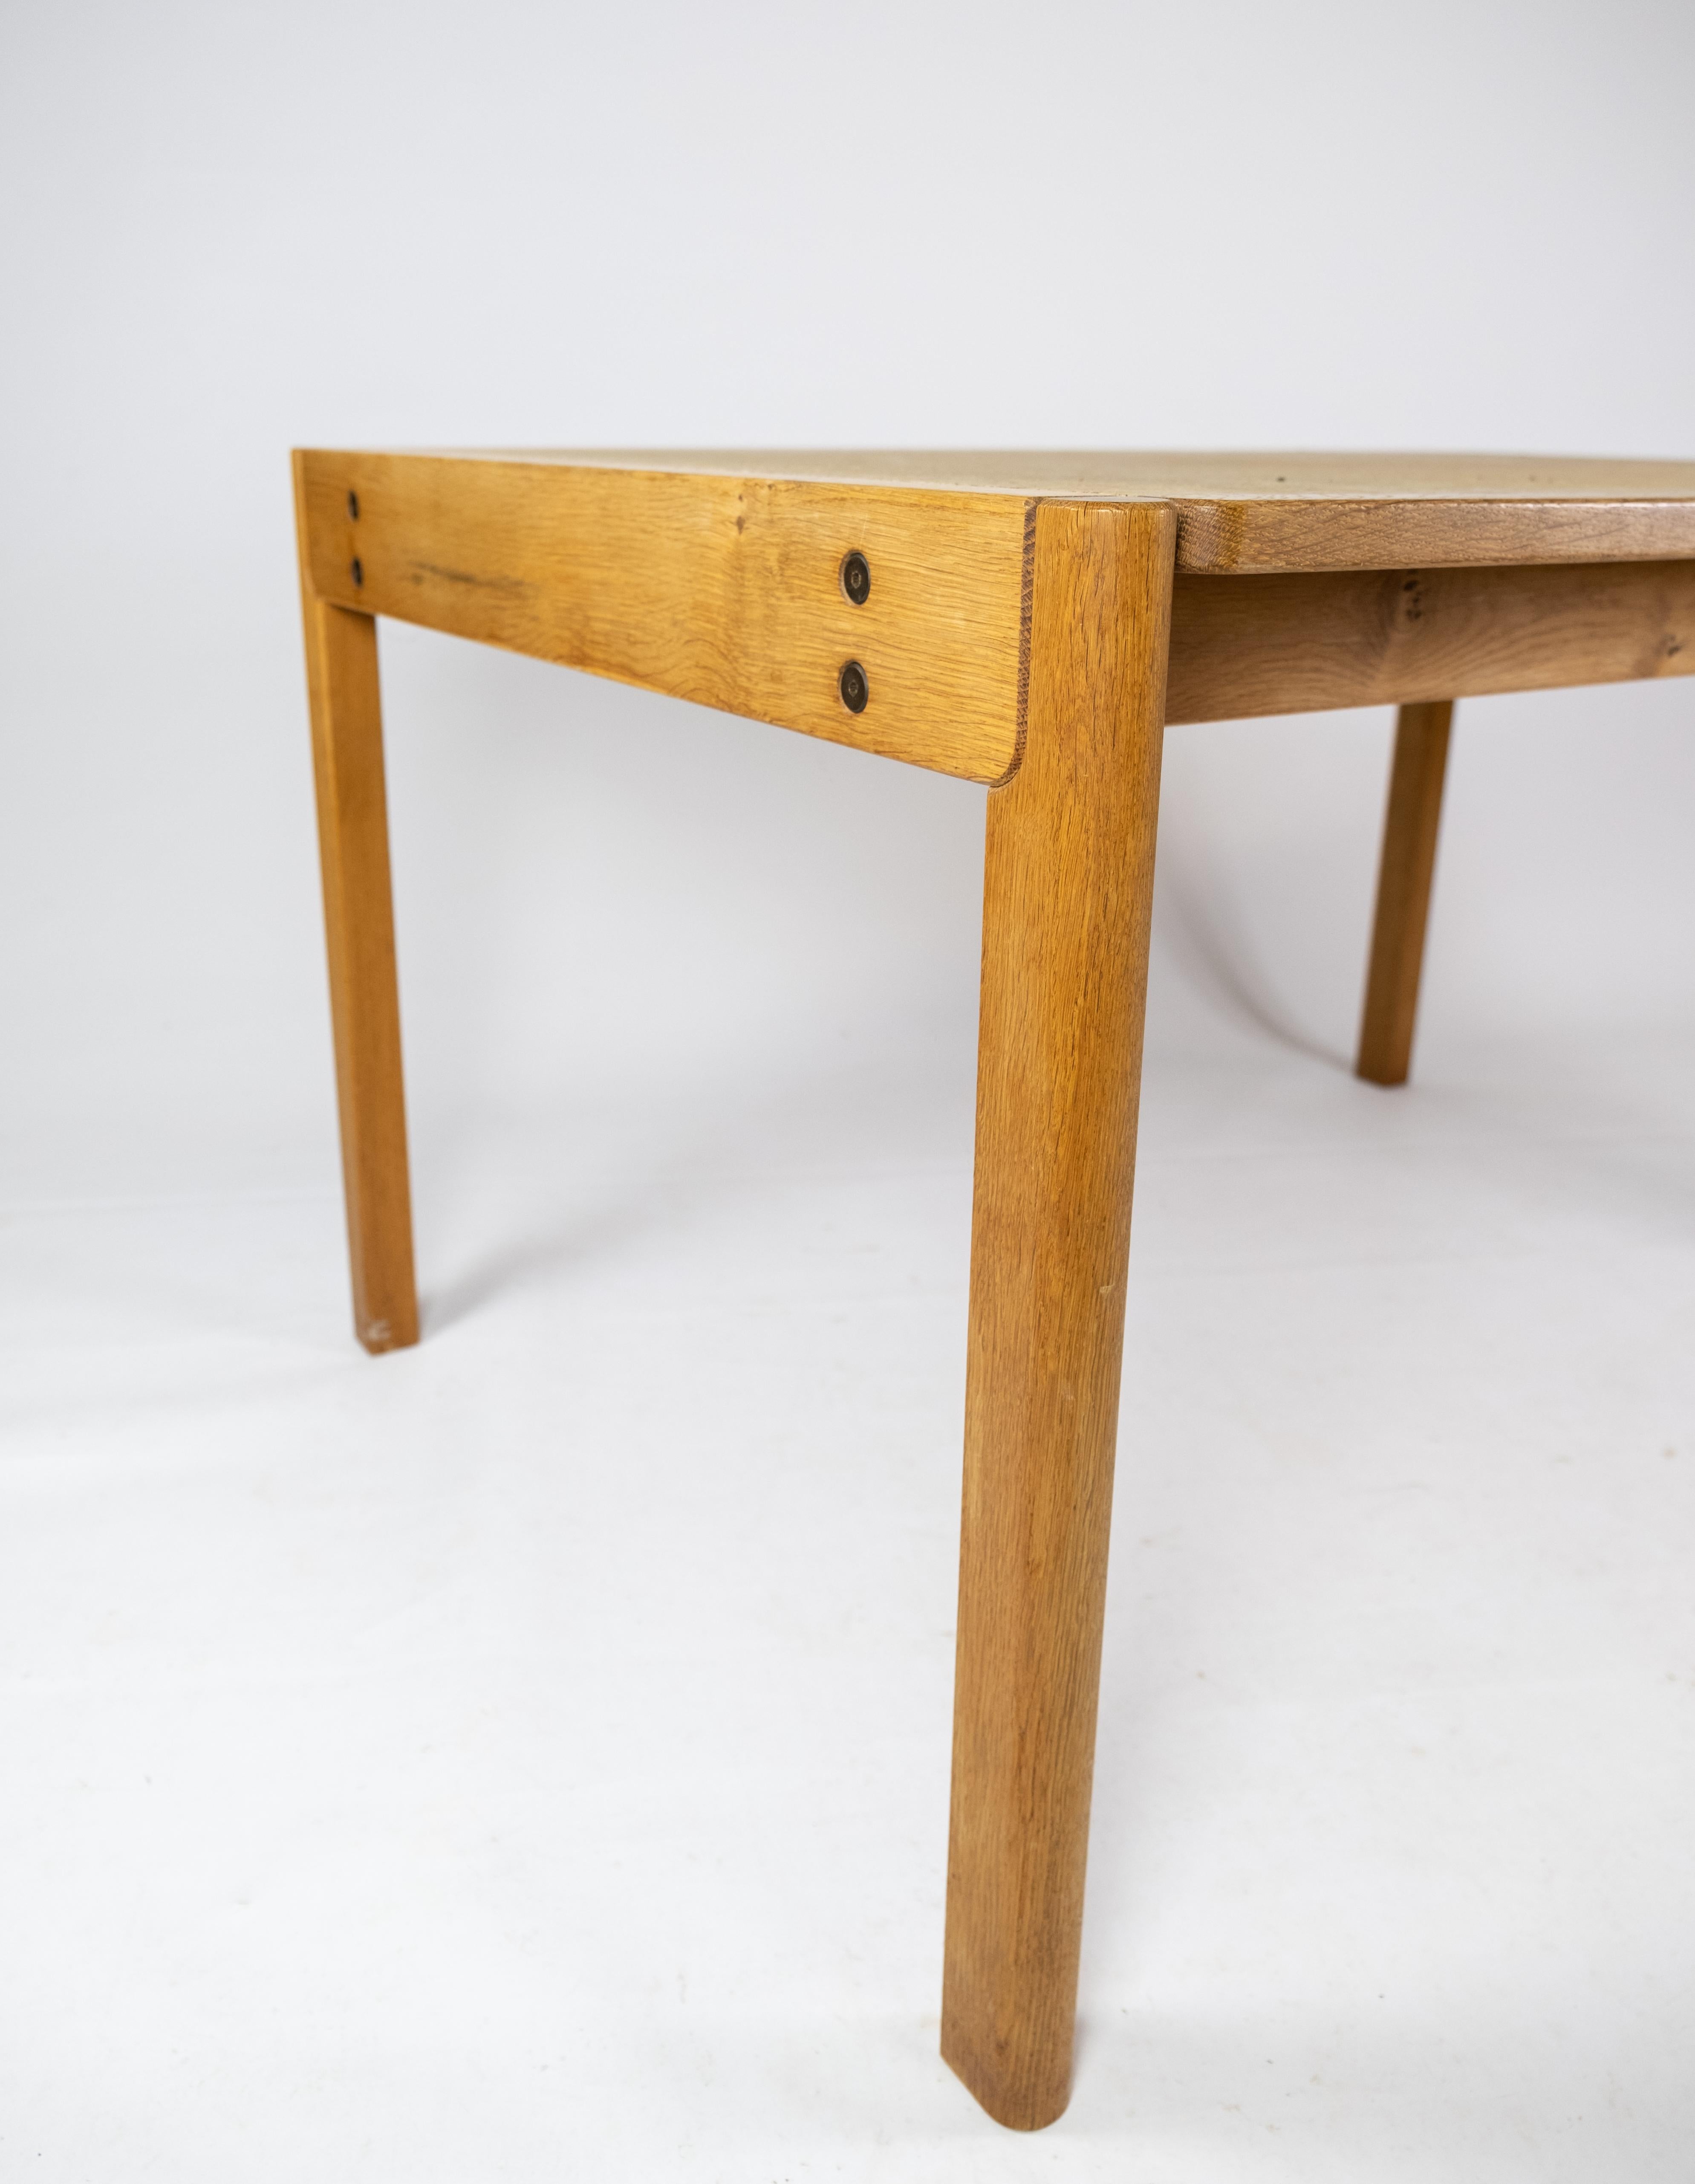 Dining Table Made In Oak & Cork, Danish Design From 1970s In Good Condition For Sale In Lejre, DK